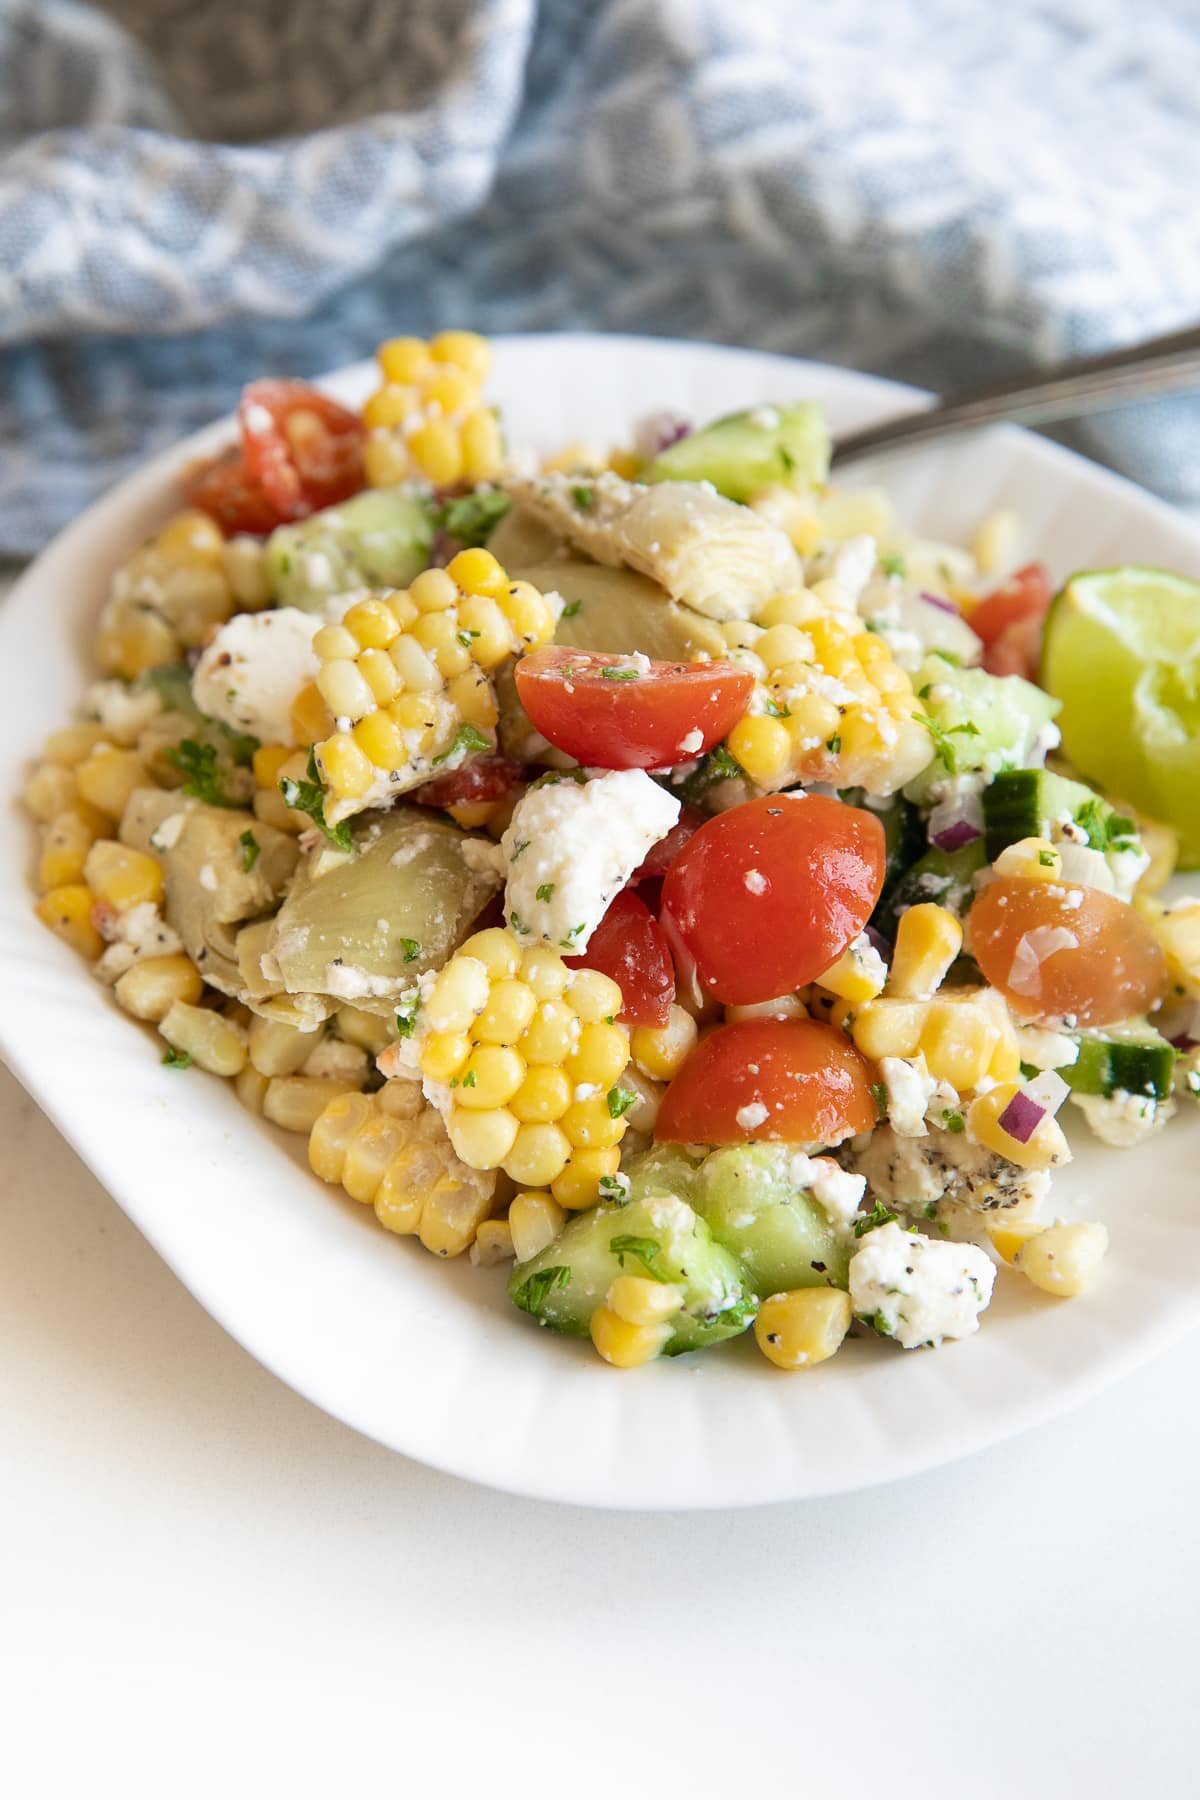 Small serving plate filled with fresh corn salad made with corn, cherry tomatoes, cucumber, feta cheese, and artichoke hearts.